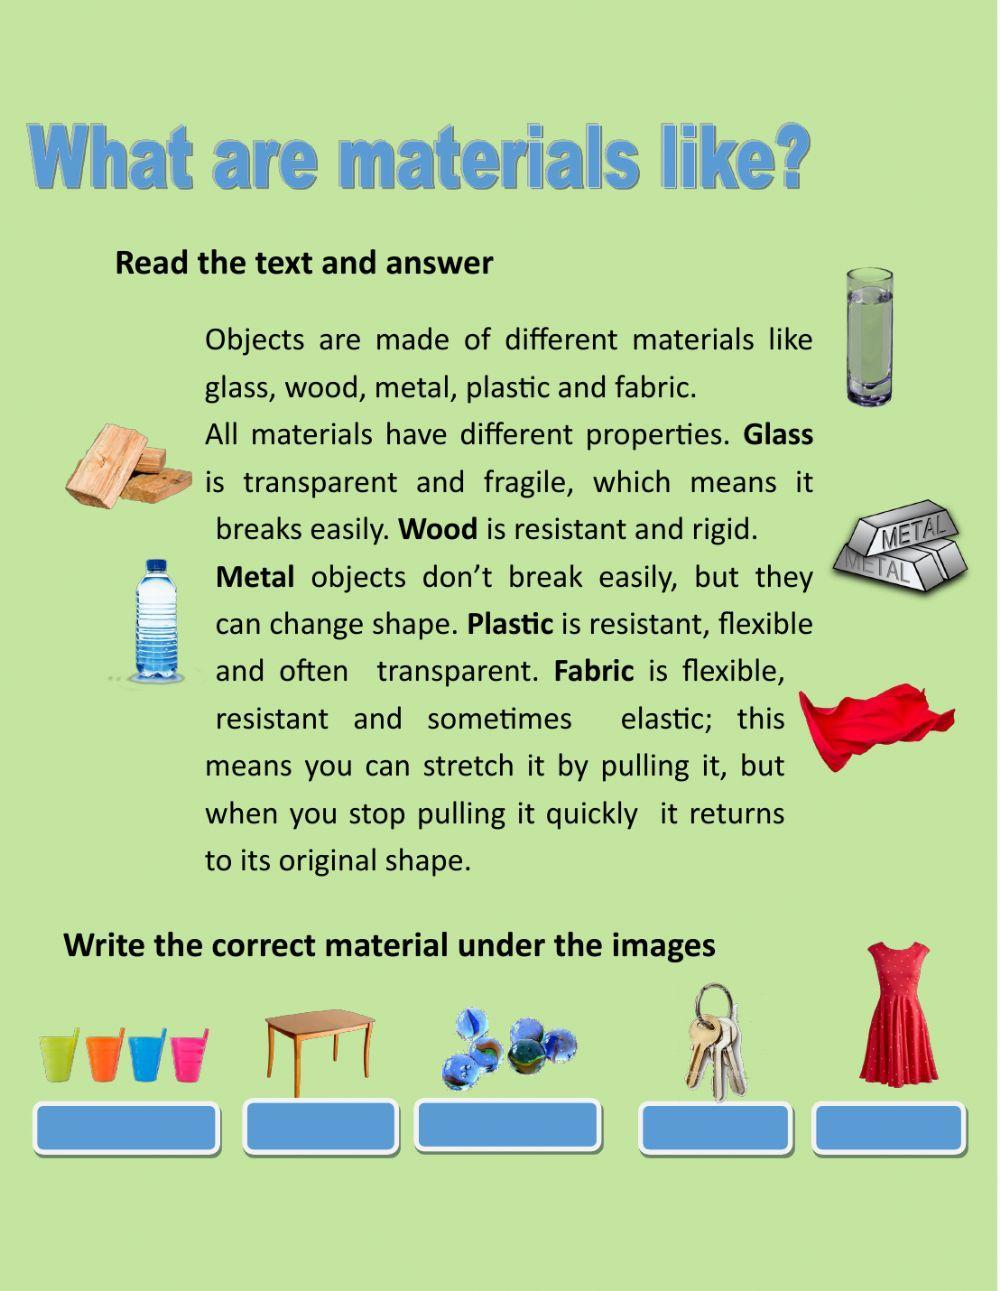 What are materials like?